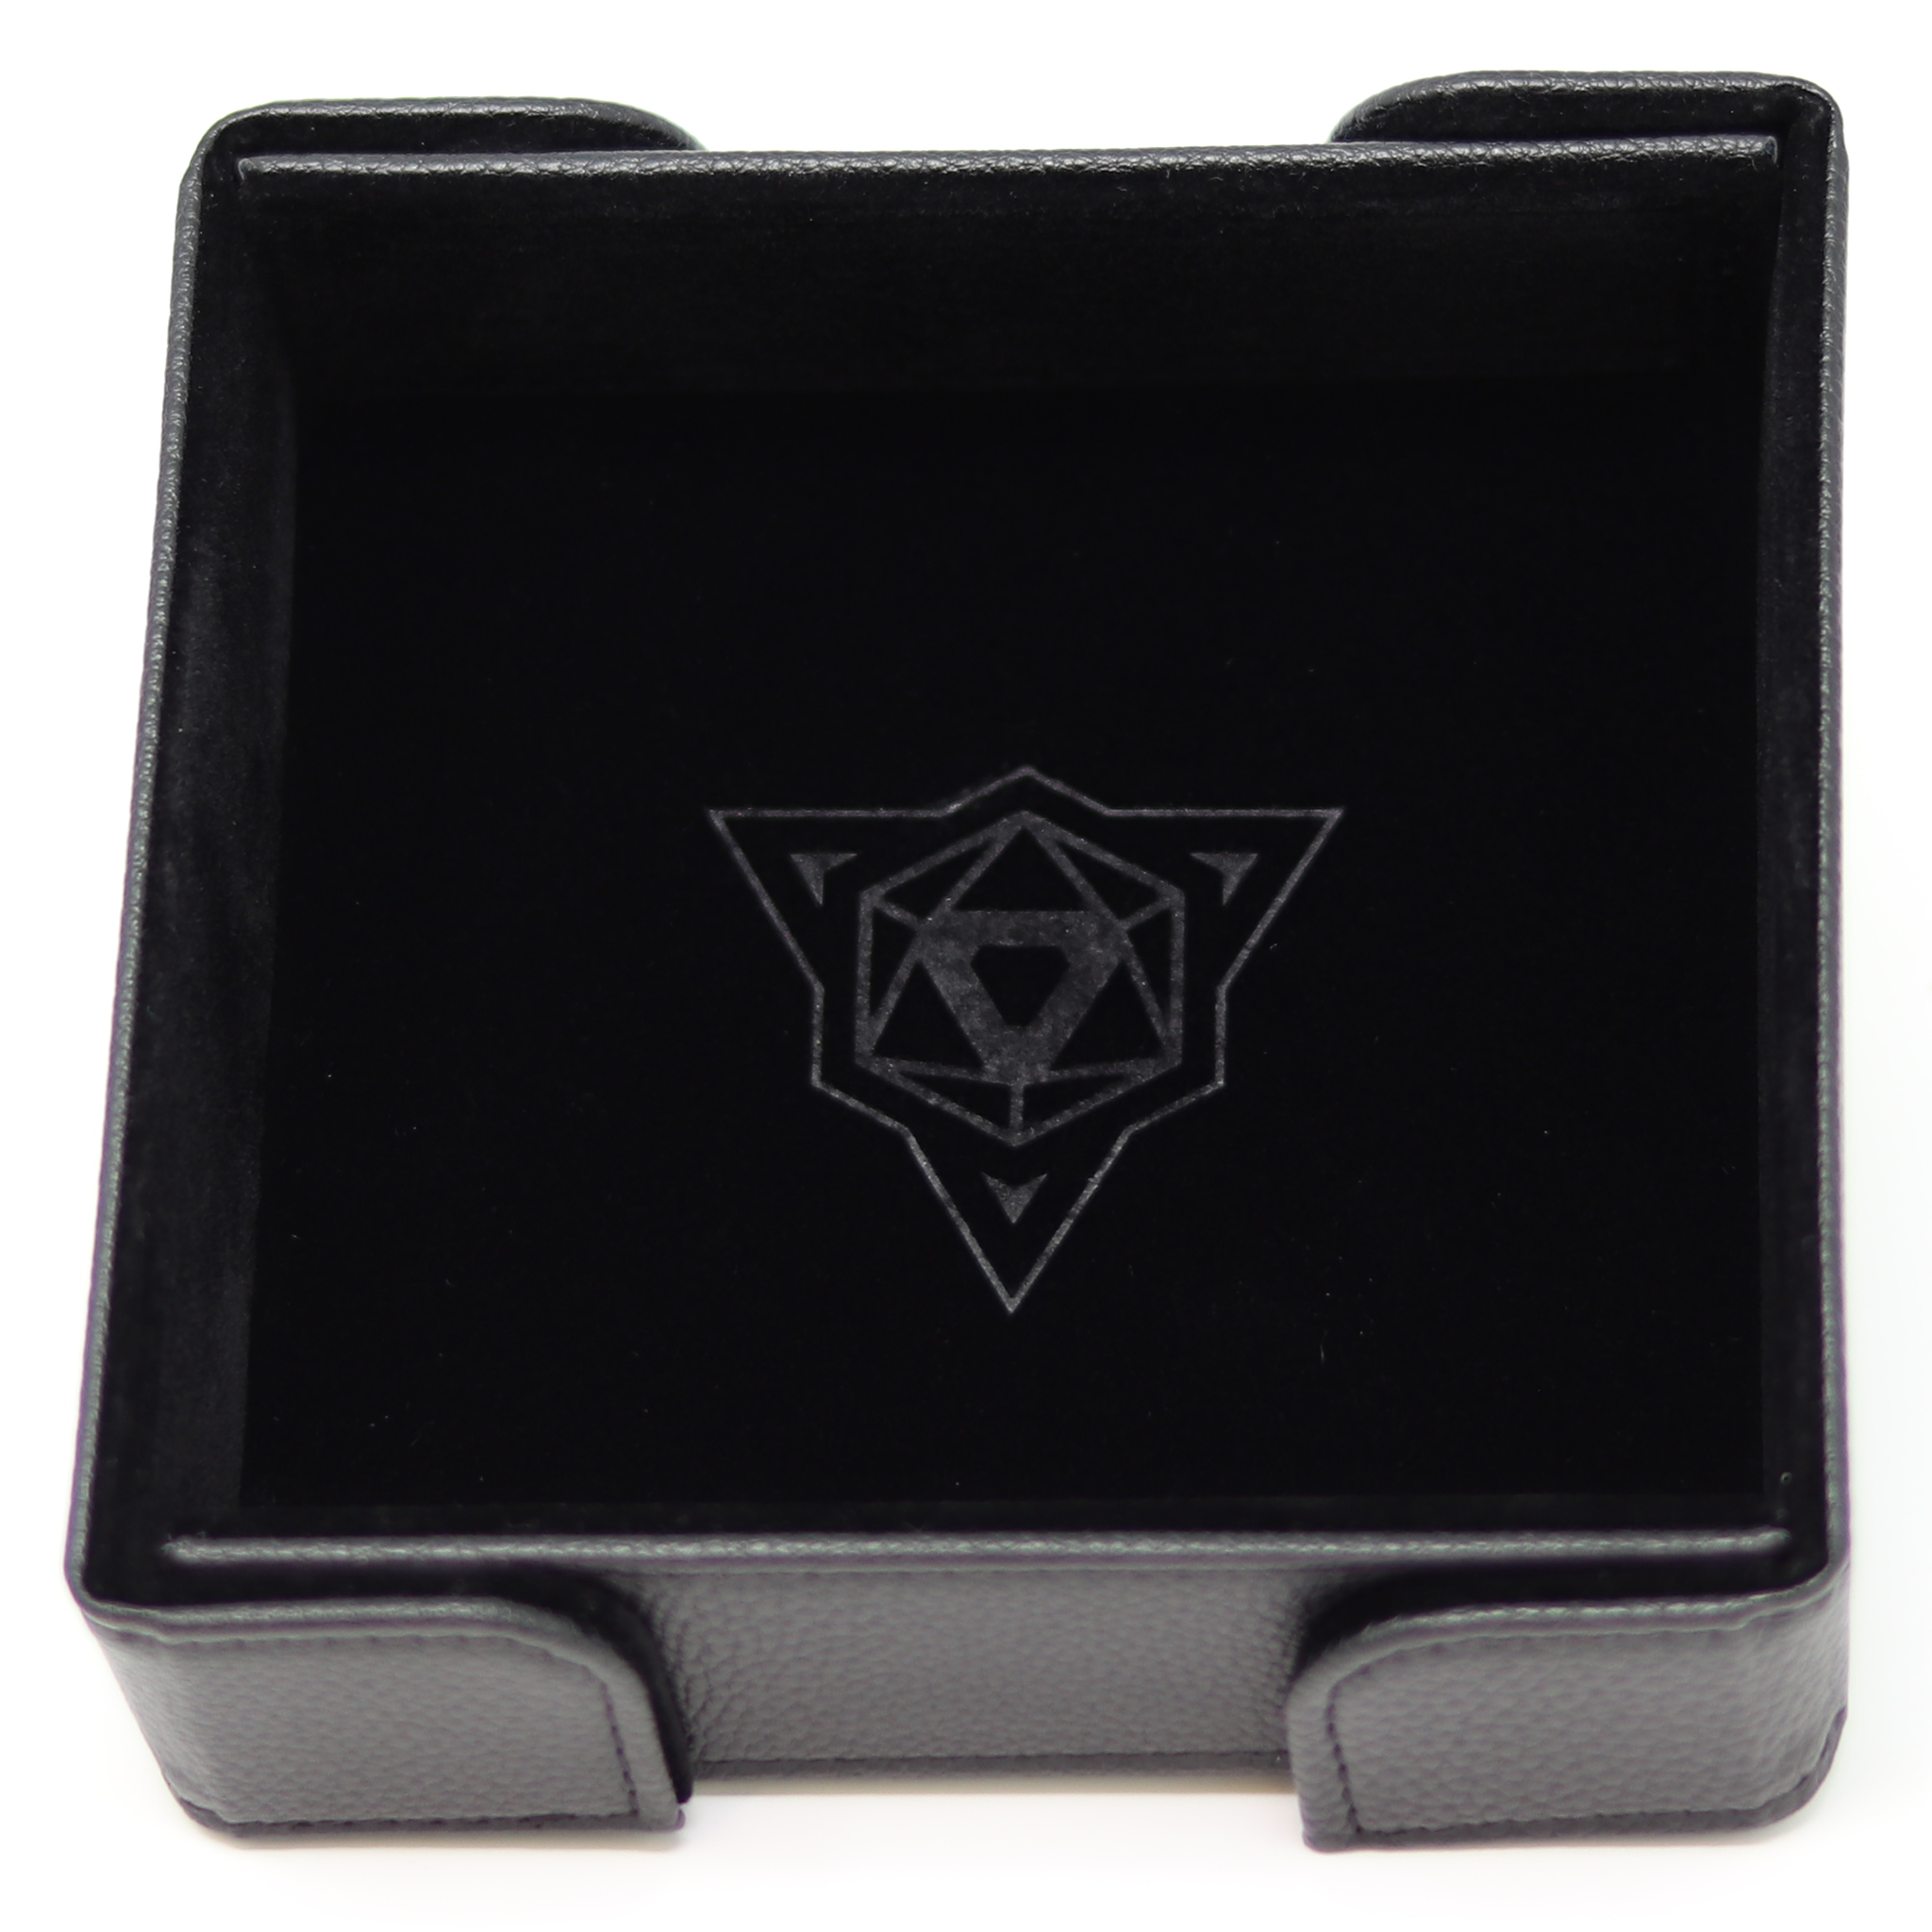 Die Hard Magnetic Square Tray w/ Black Velvet | Anubis Games and Hobby